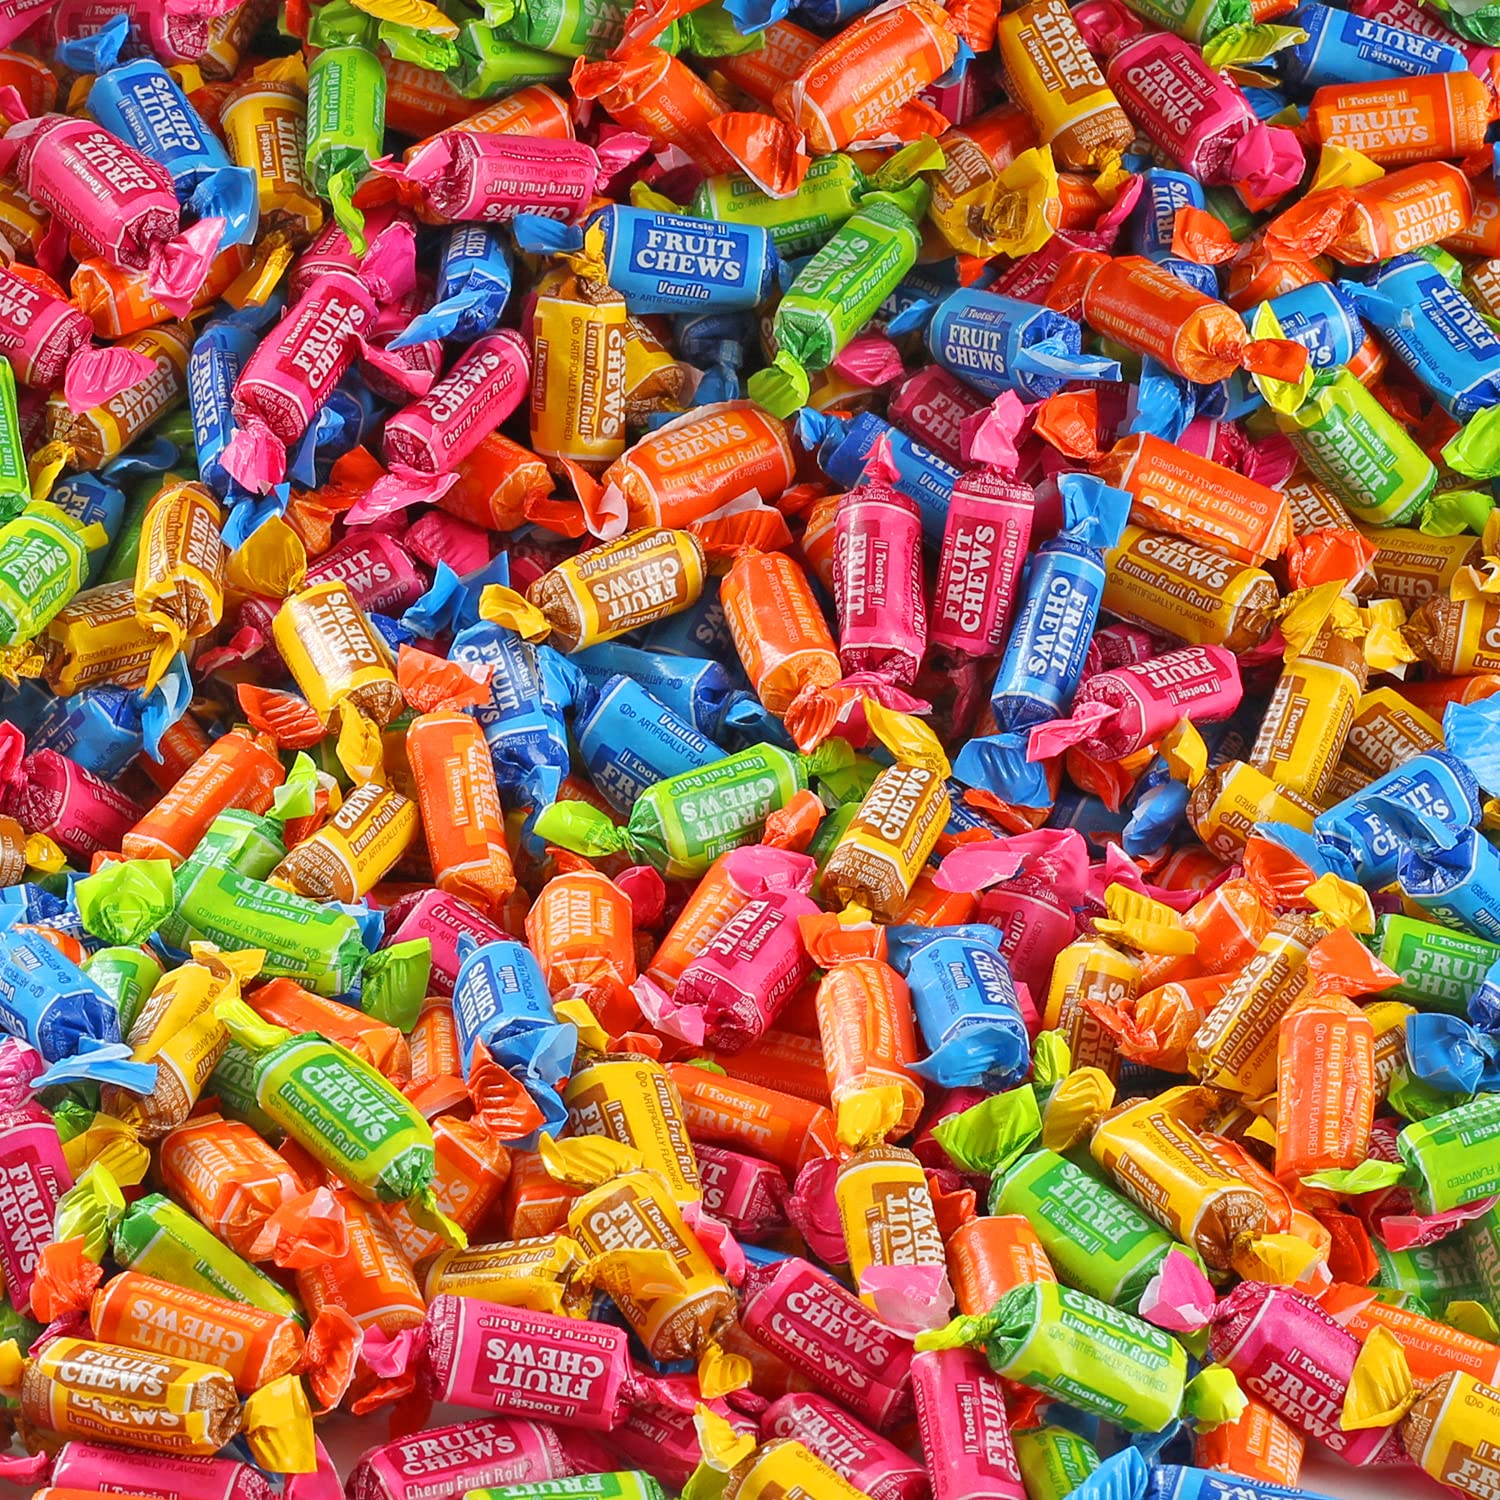 Lots of fruit flavored Tootsie rolls all mixed together.